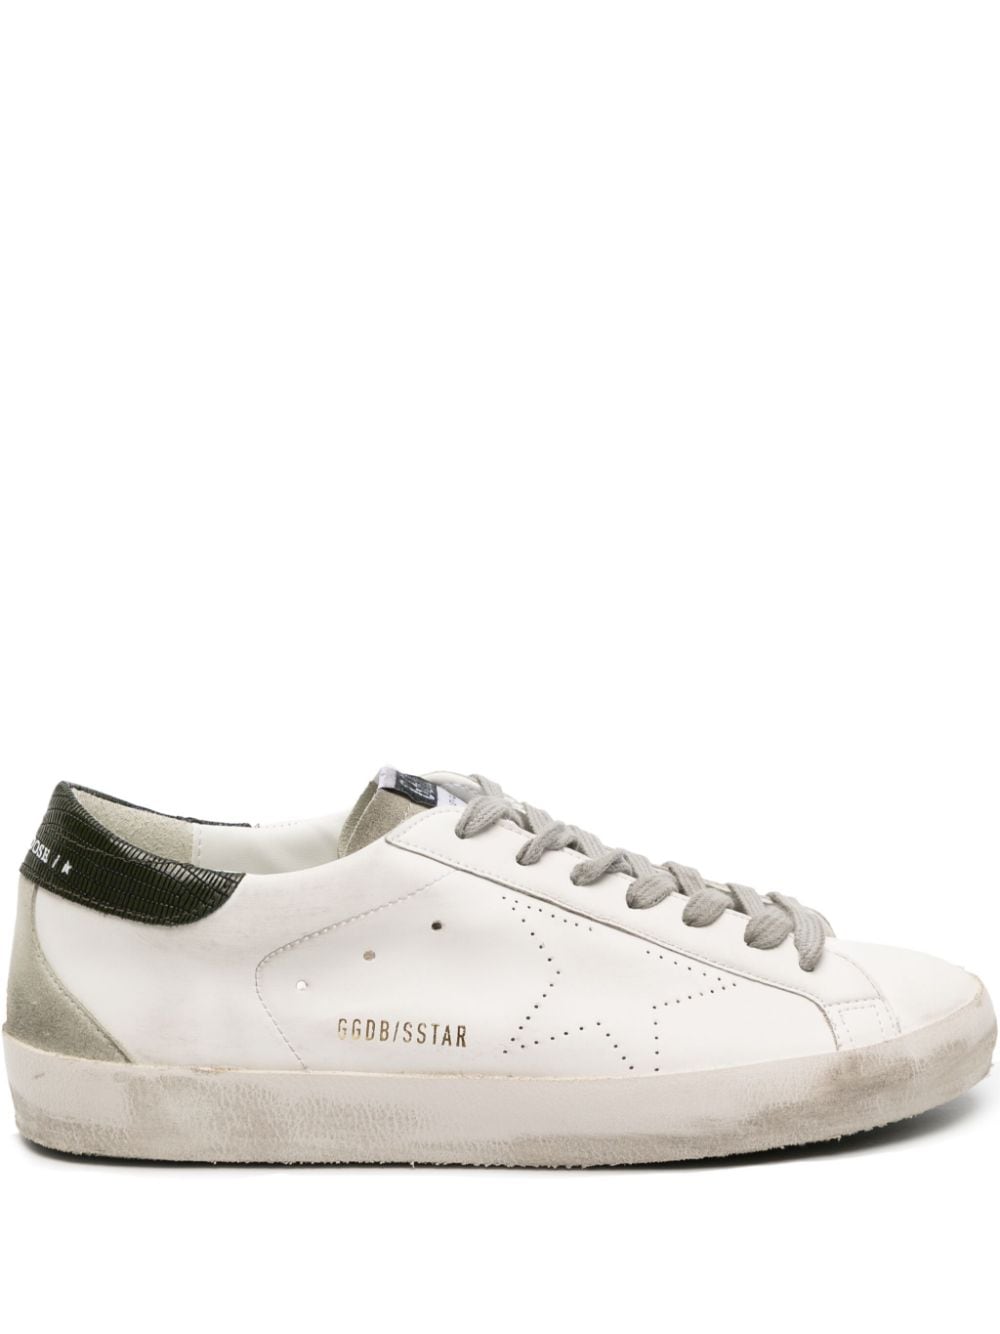 Golden Goose Super-star Leather Sneakers In White